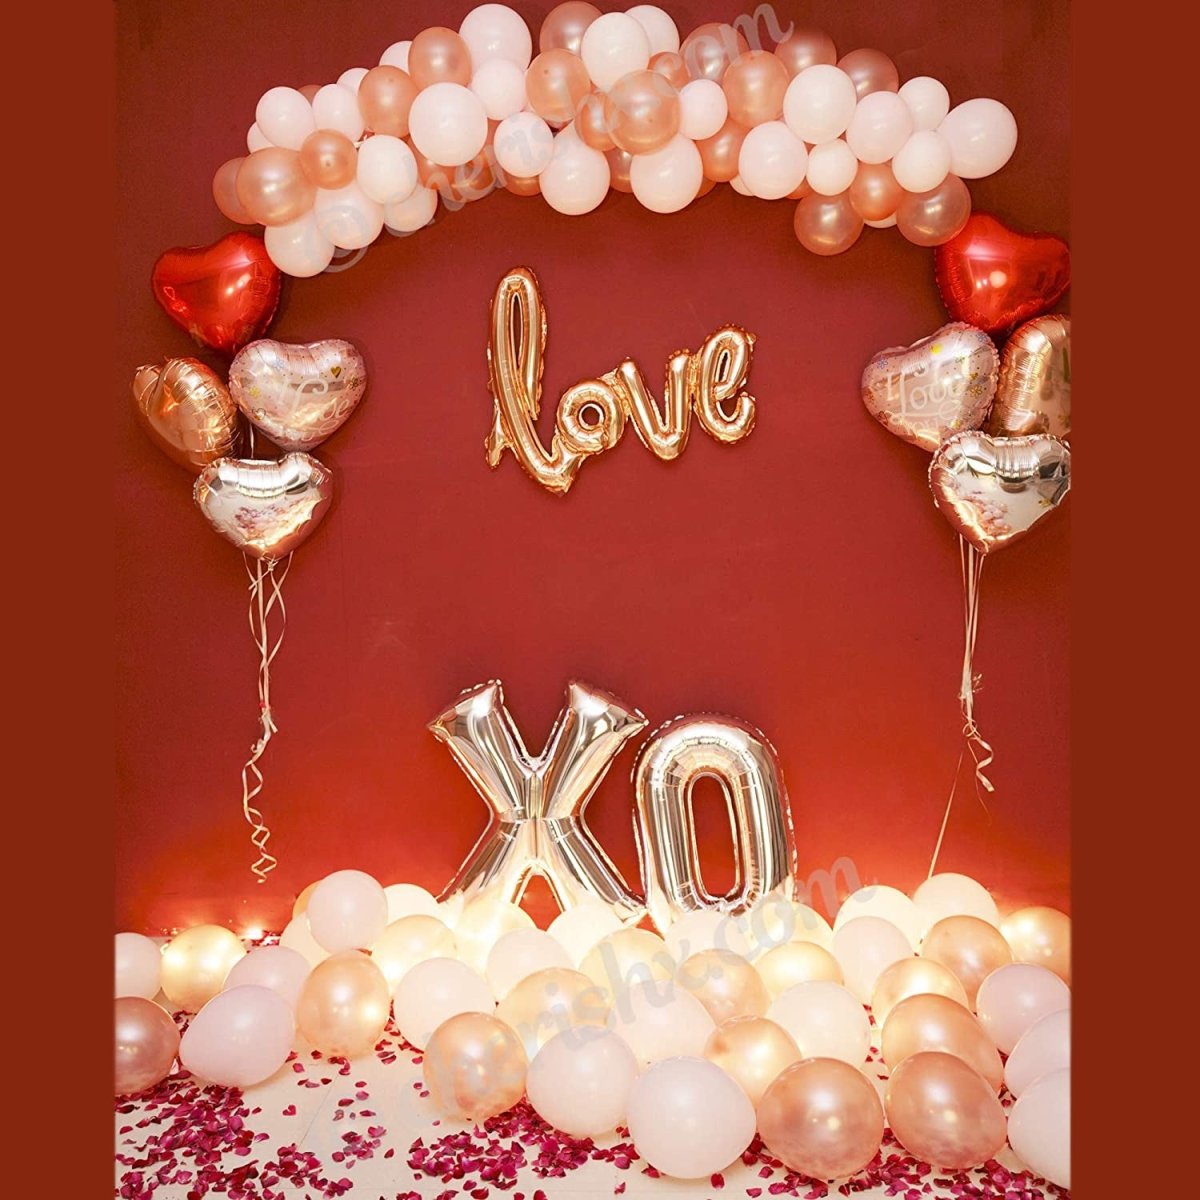 Romantic Rose Gold Love XO Wall at Home DIY Decoration Balloon Kit Party Supplies freeshipping - CherishX Partystore